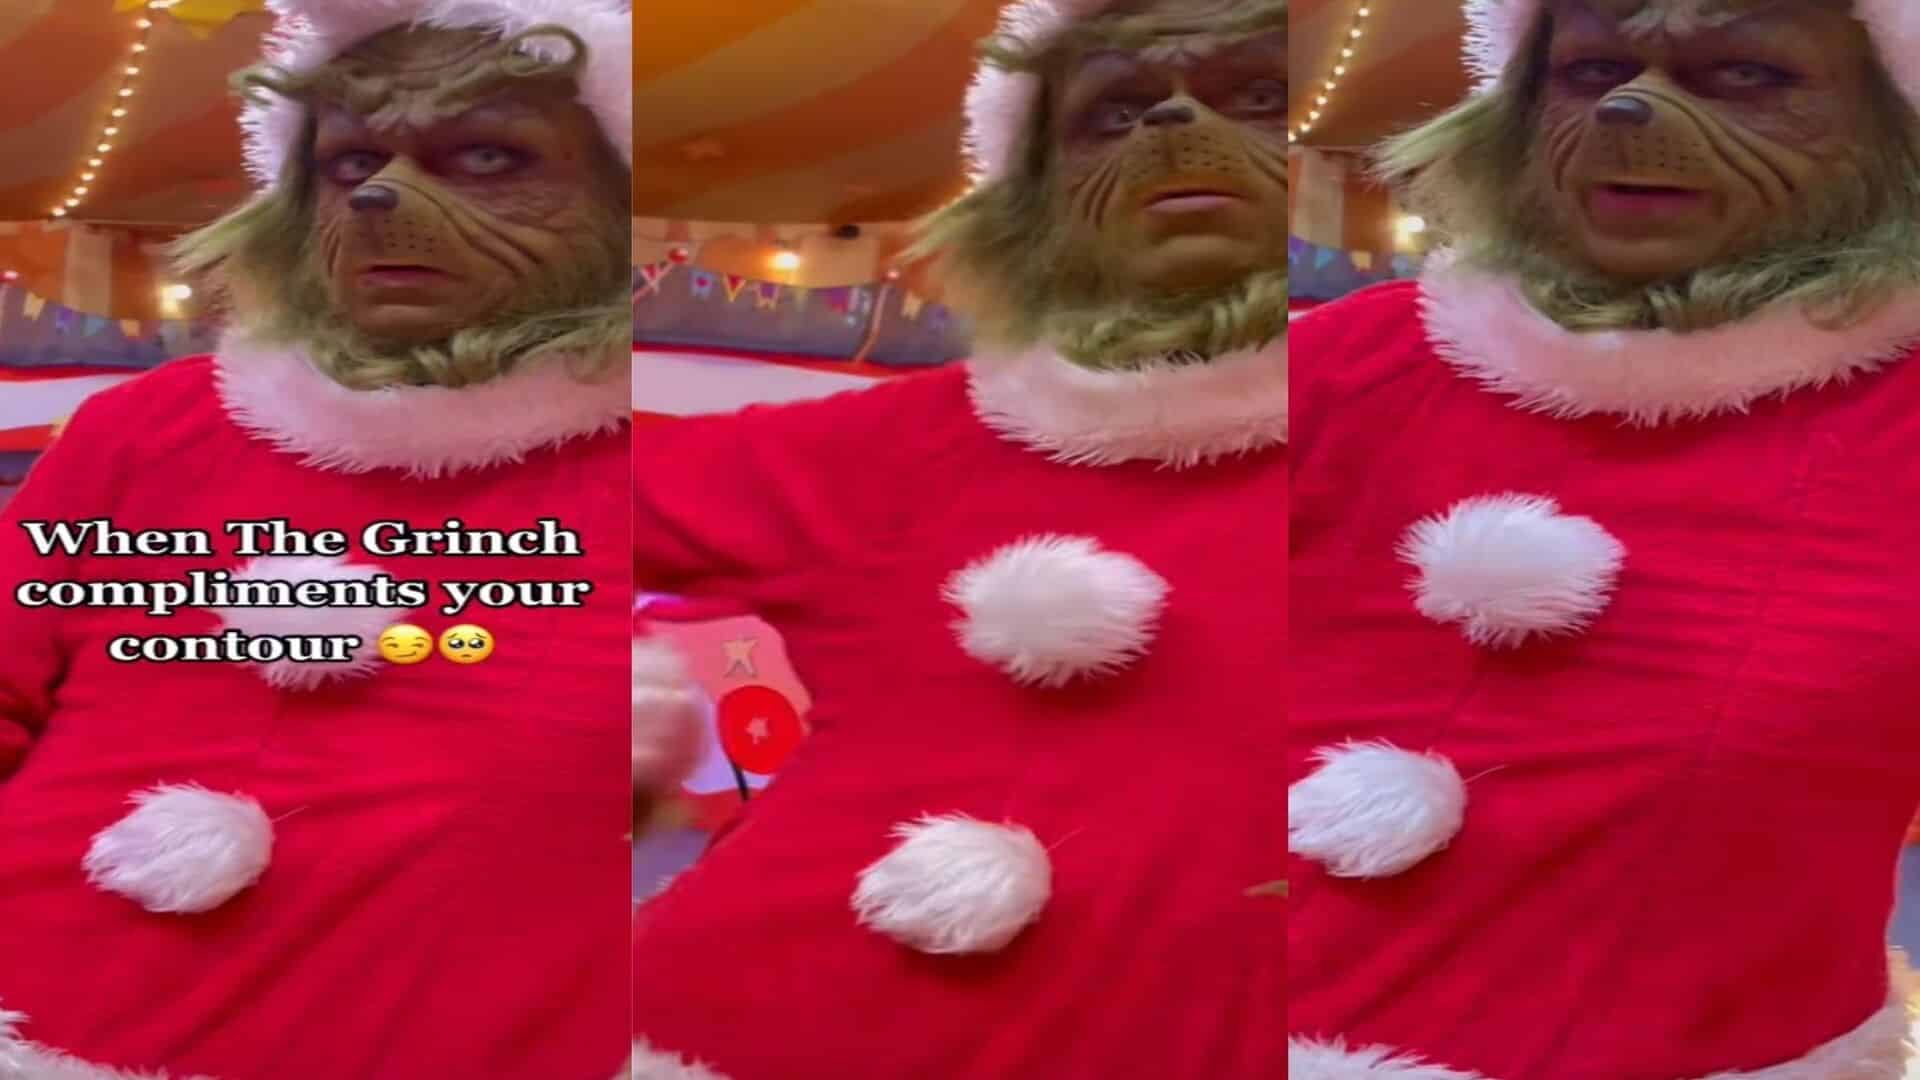 TikToker Weirdly Attracted to Theme Park Grinch